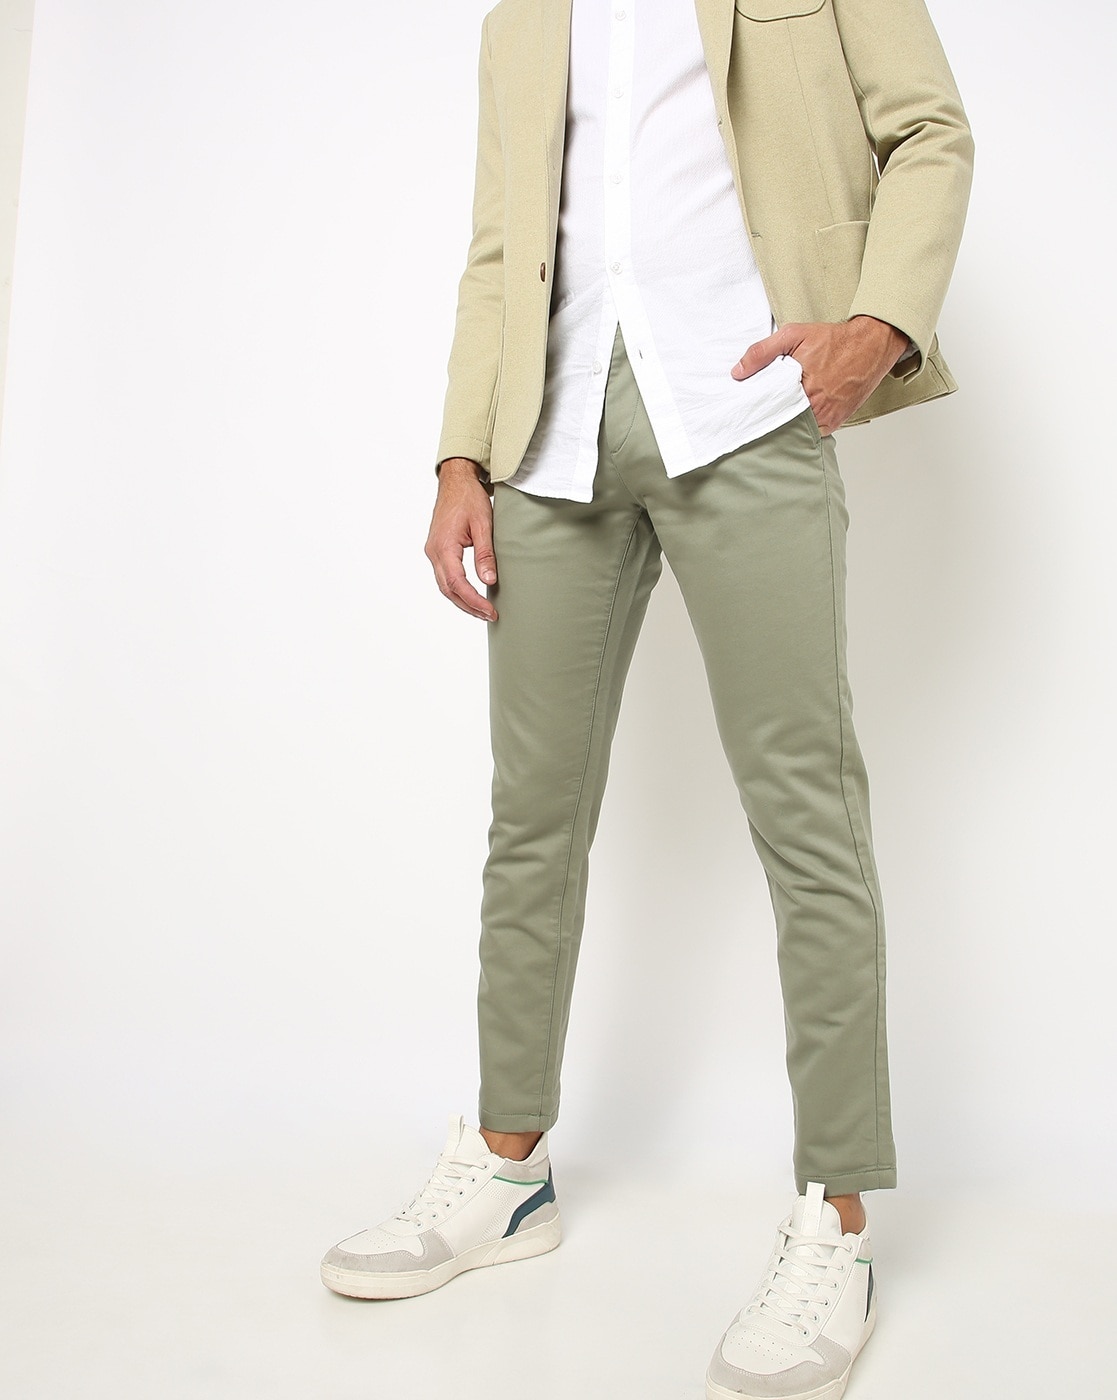 Buy Rhysley Olive Green Formal Cotton Pant at Amazonin